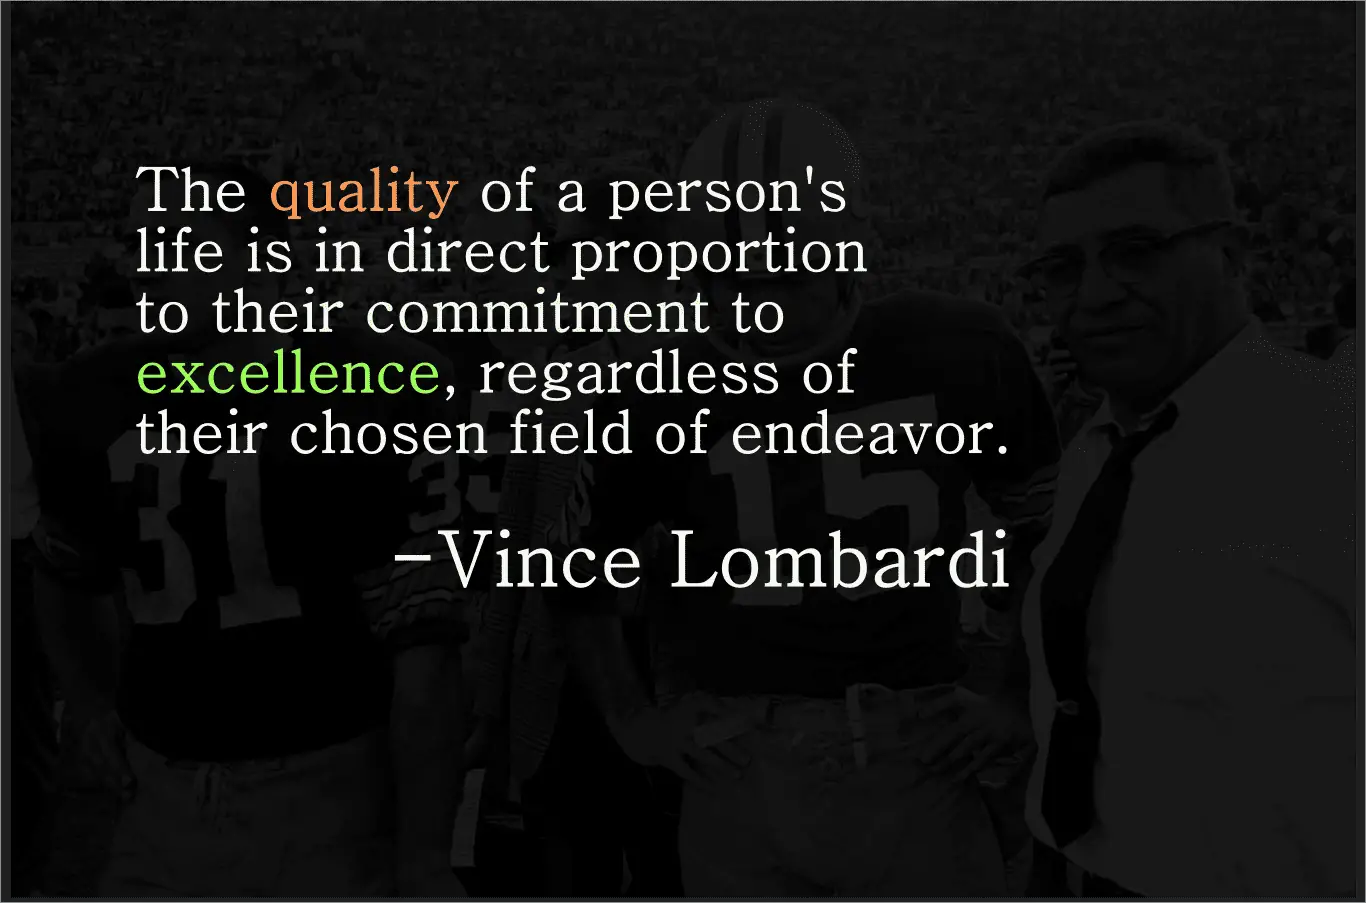 vince-lombardi-quotes